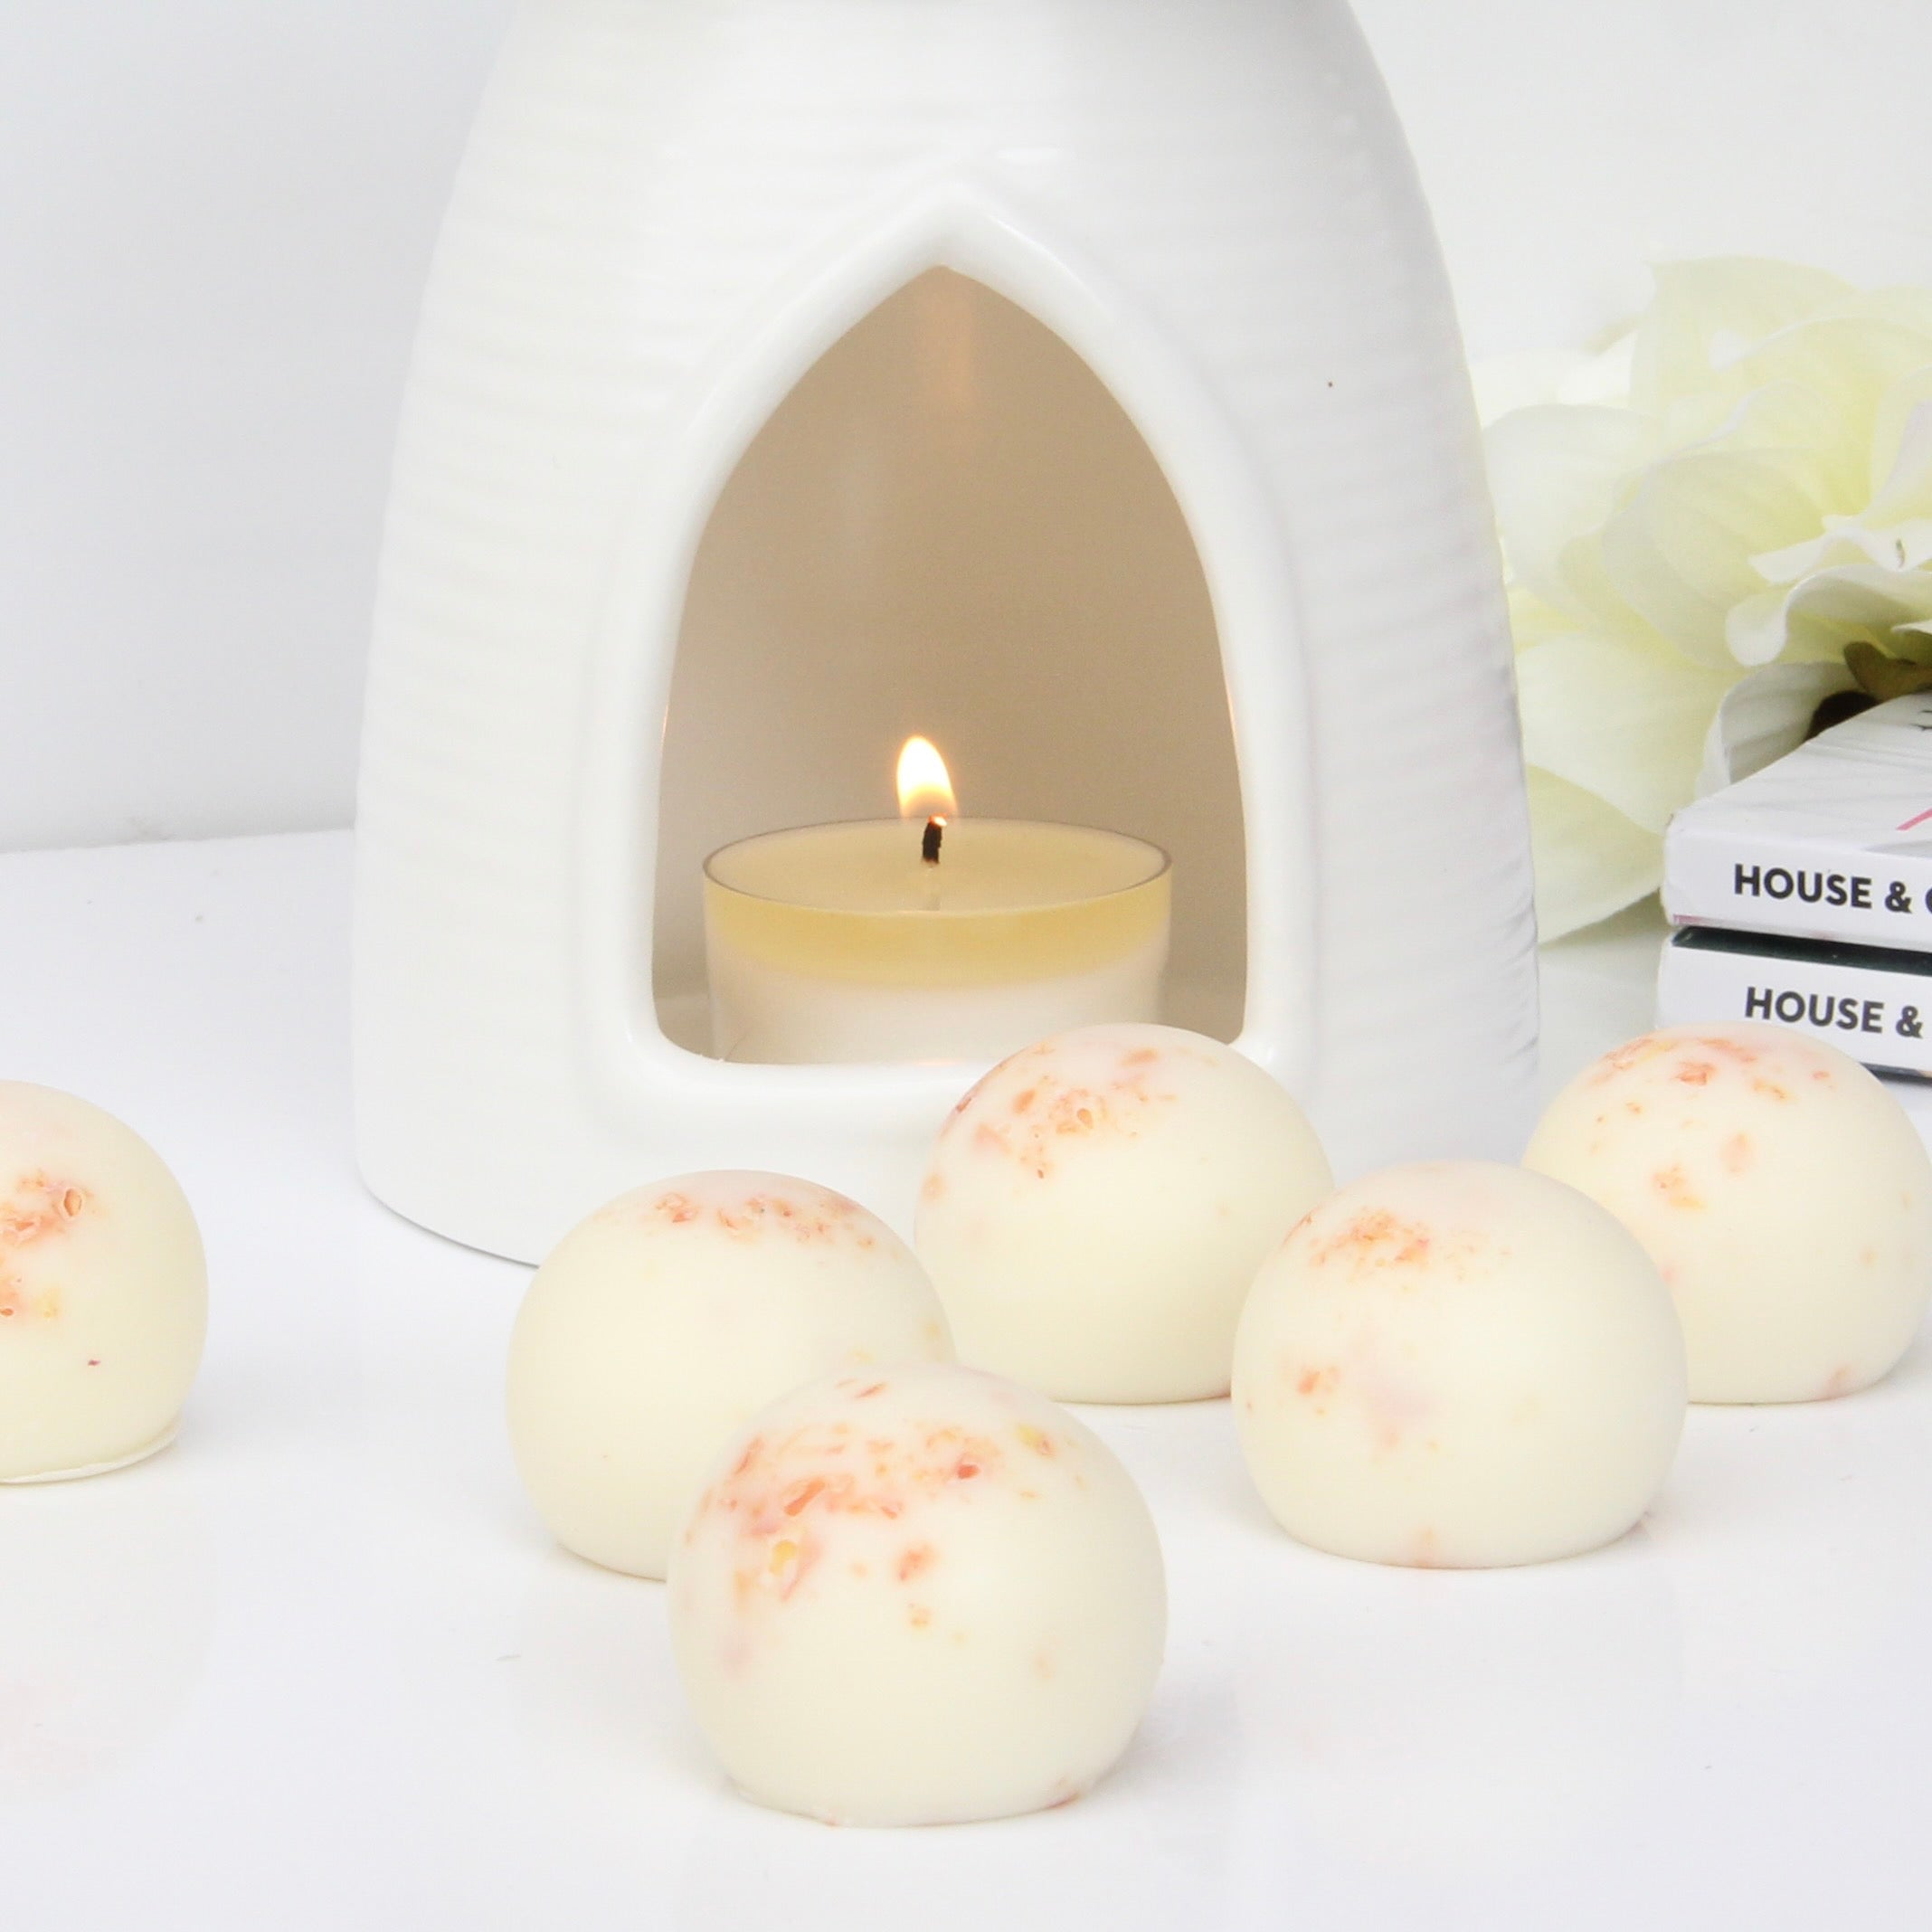 Honey Clementine Scented Wax Melts